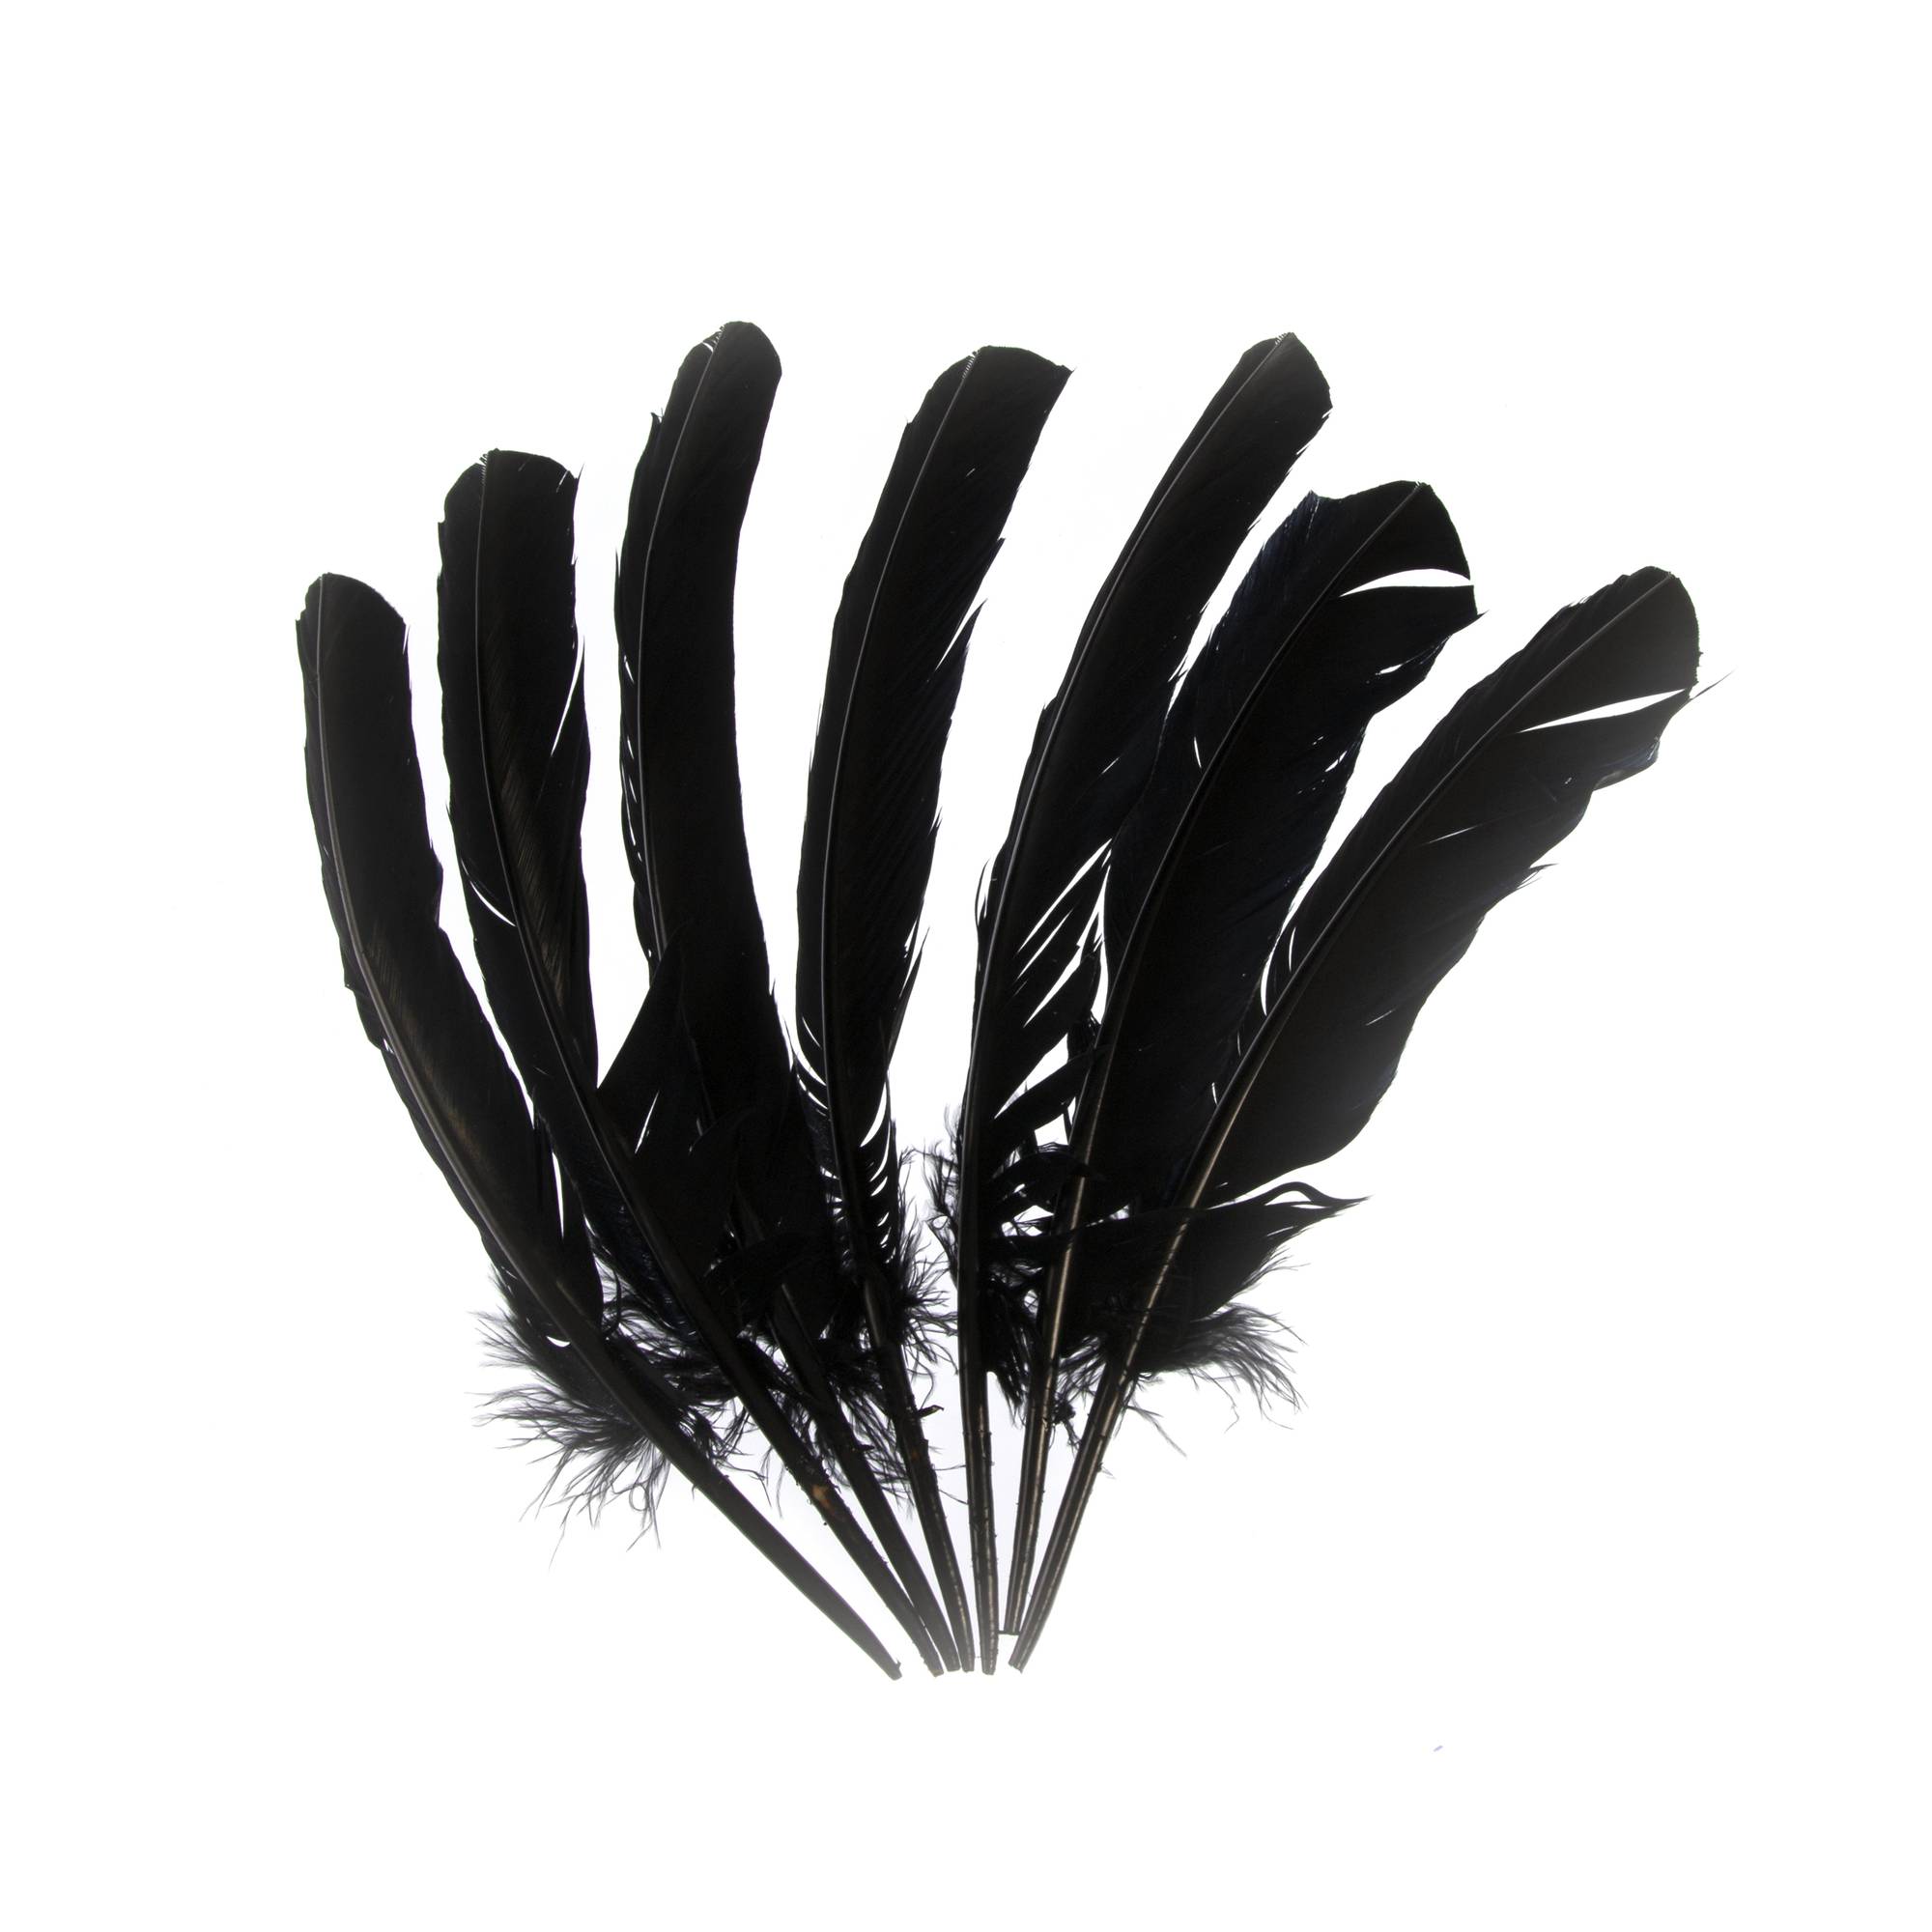 Black Feather Strip Black Craft Feathers Bulk Feathers Sewing